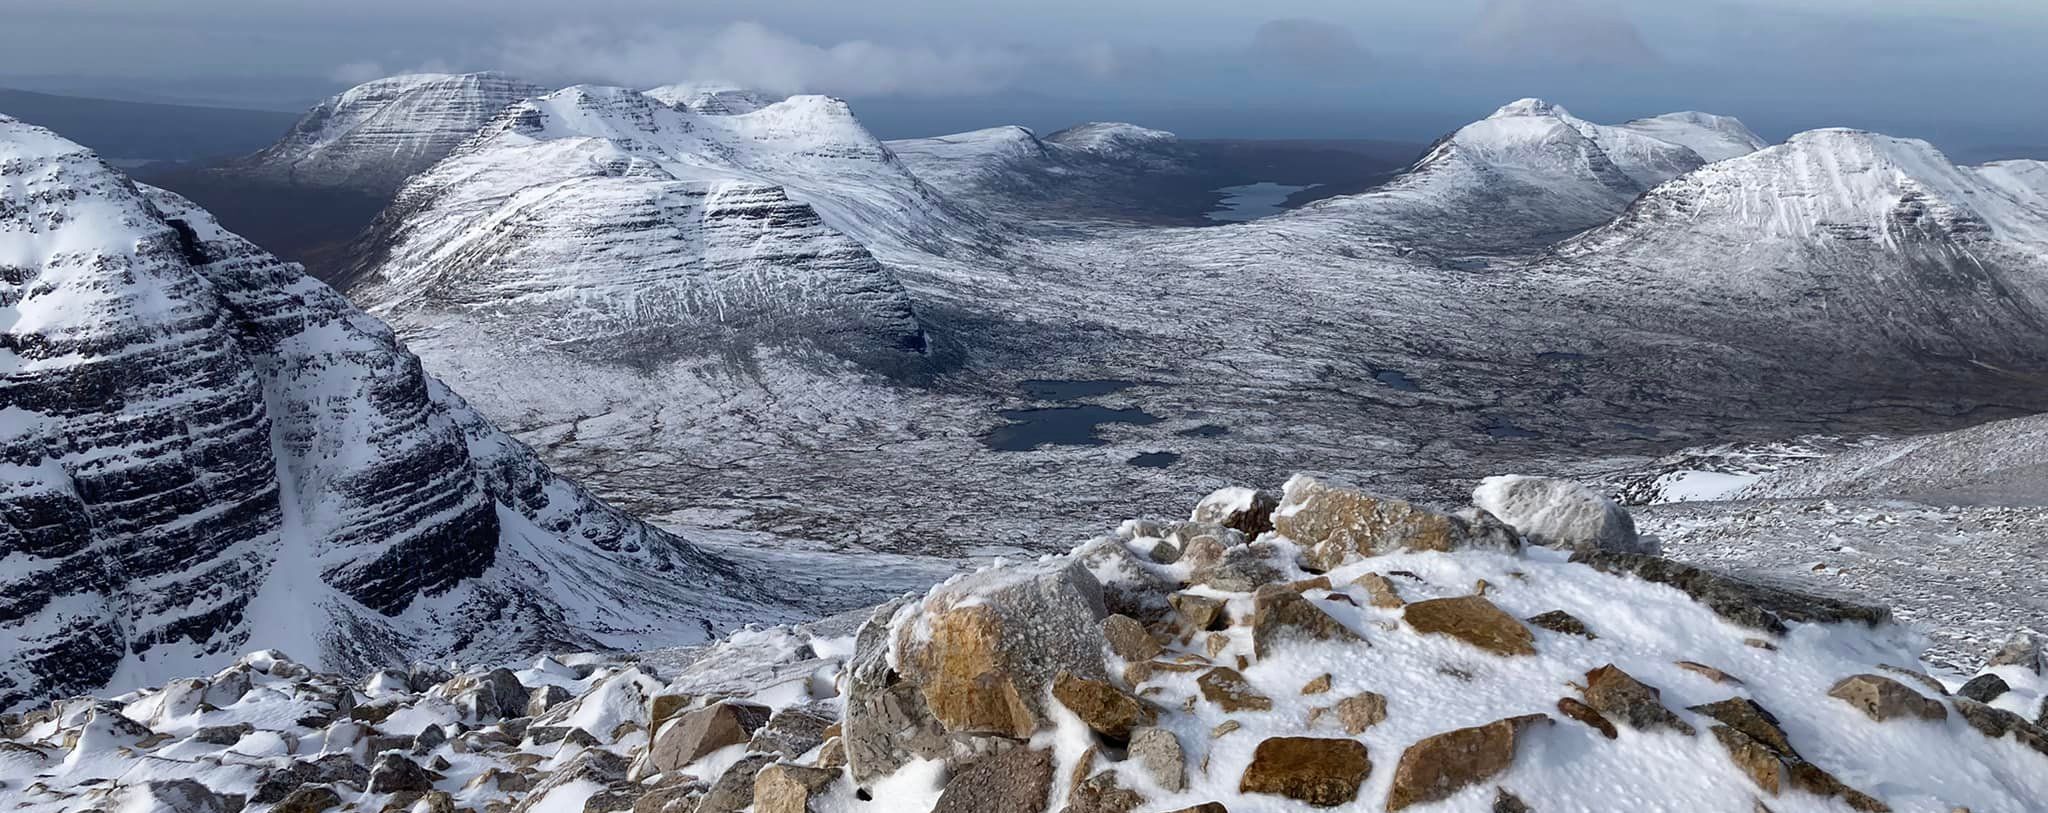 View from Beinn Eighe in the Torridon Region of the NW Highlands of Scotland